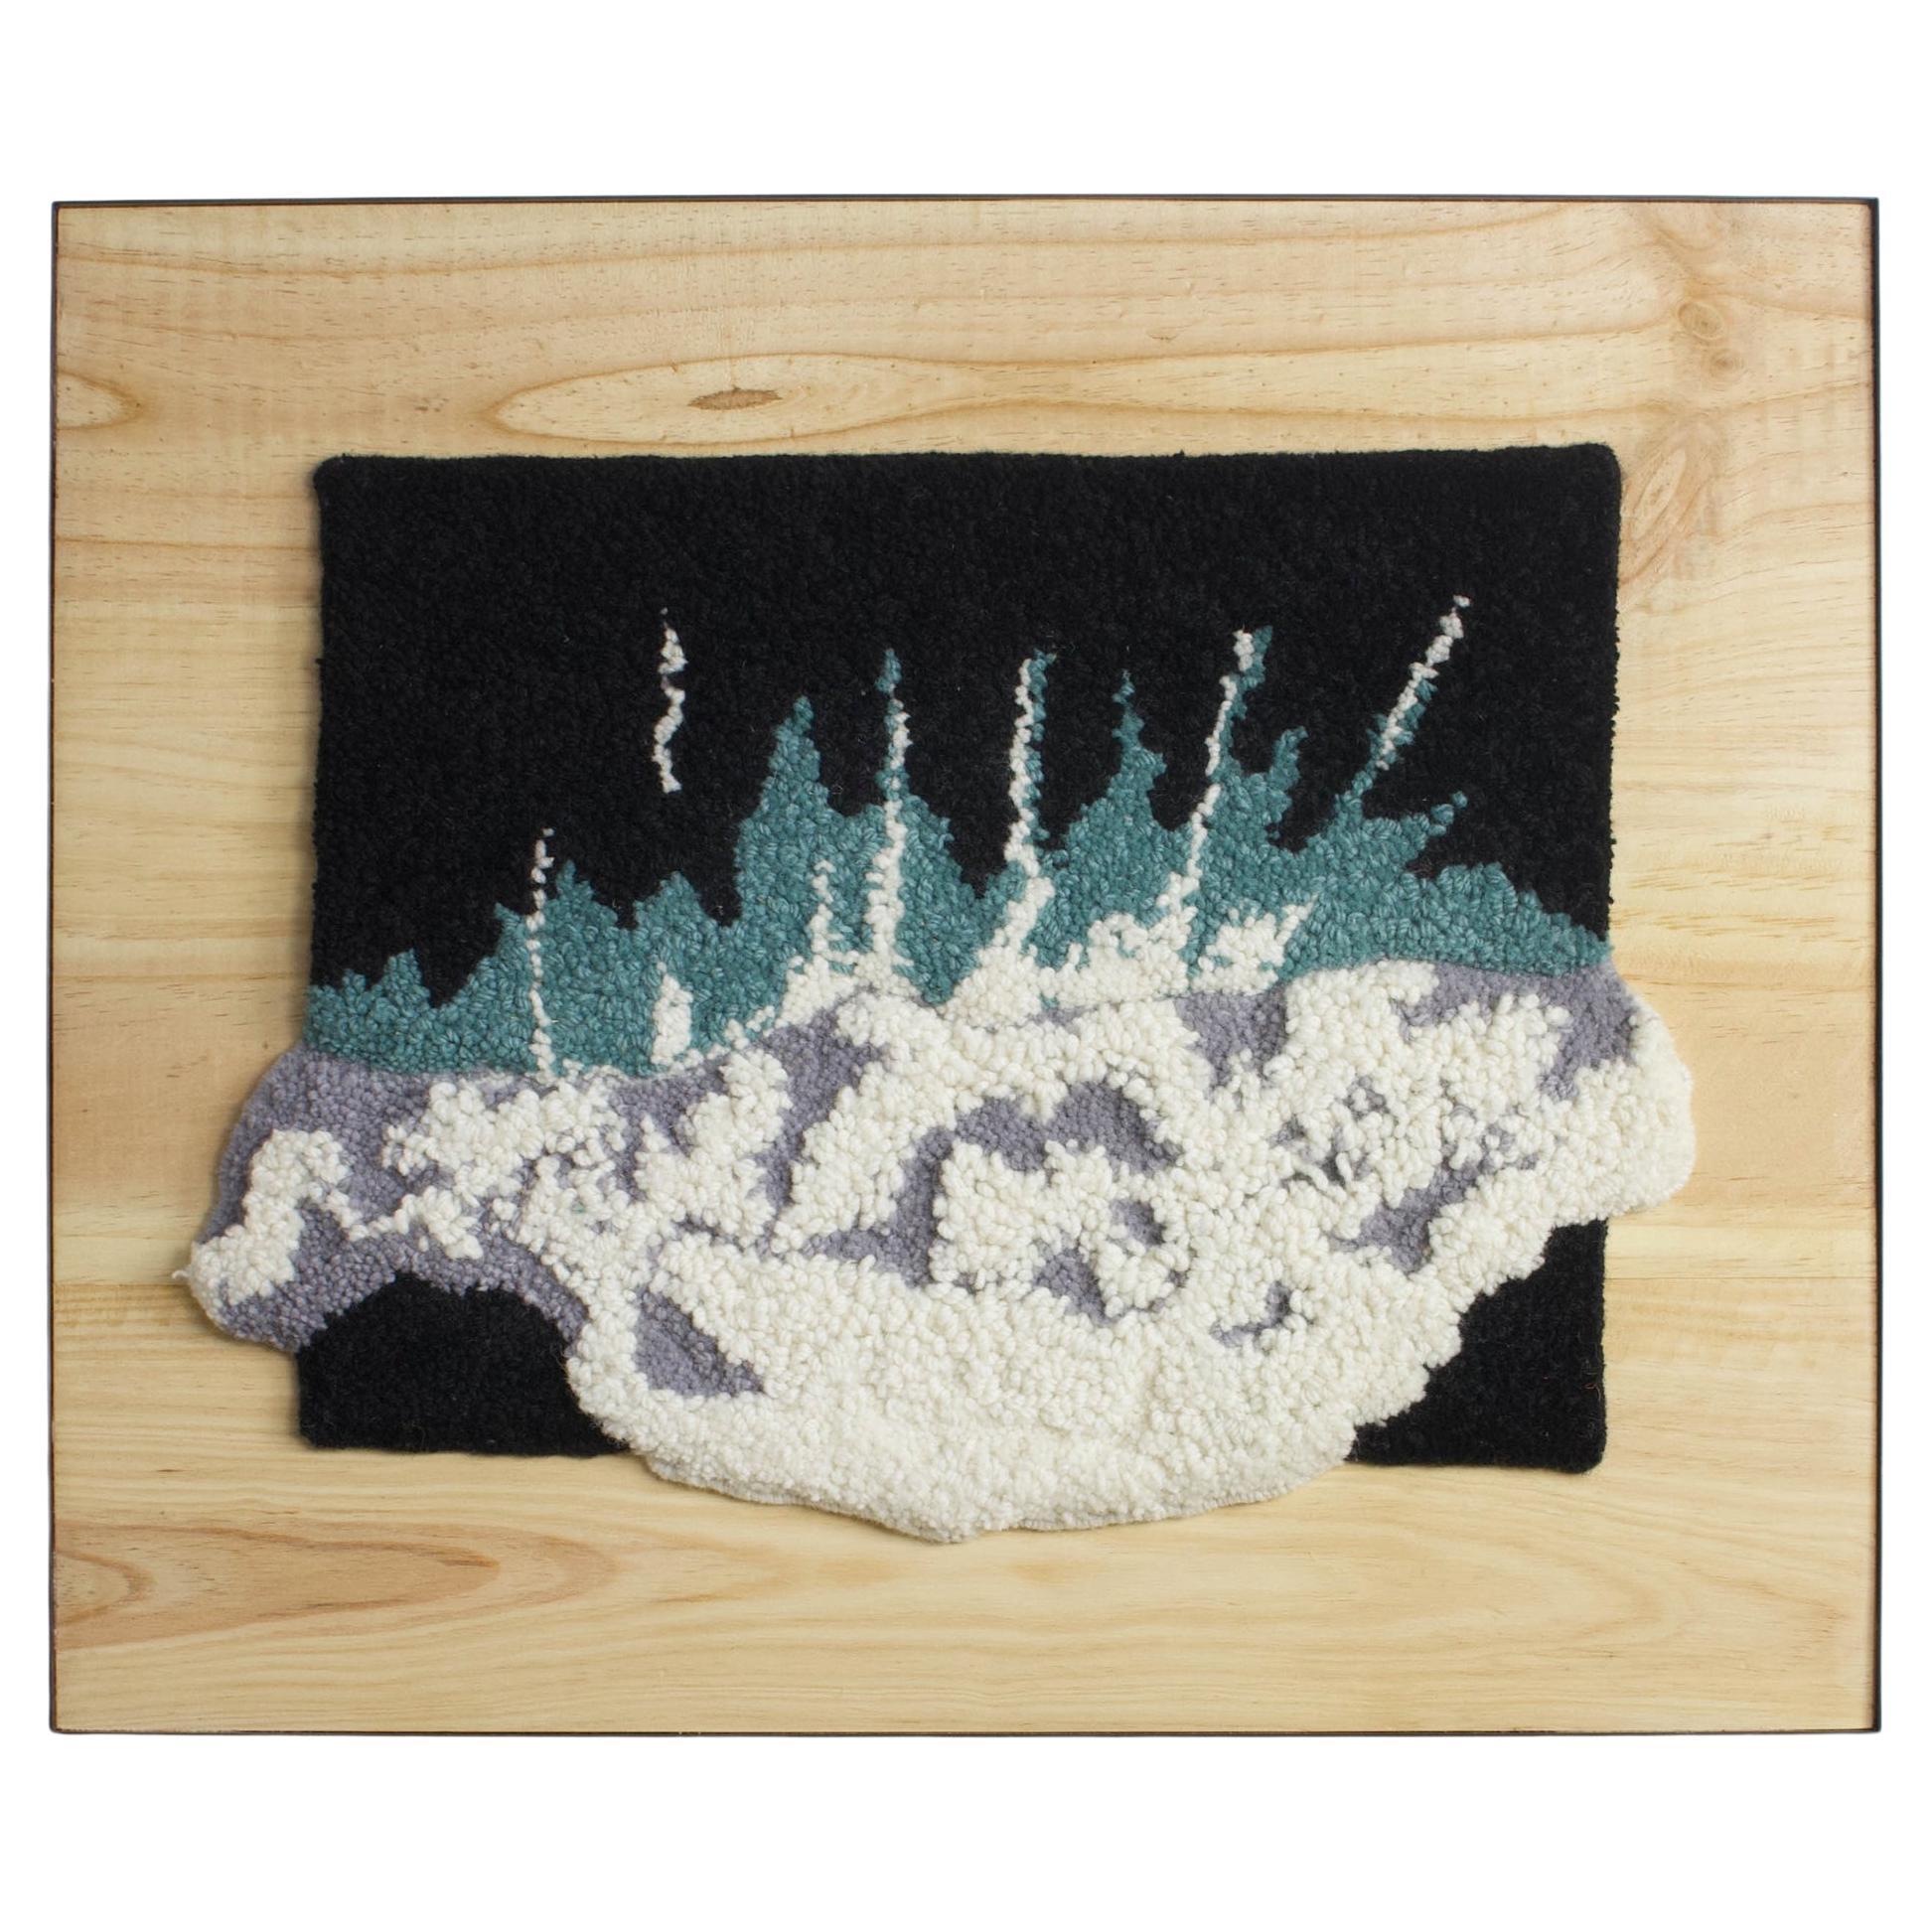 Contemporary Wall Tapestry, Textile Art, Fiber Art, Handmade, Wall Hanging, WAVE For Sale